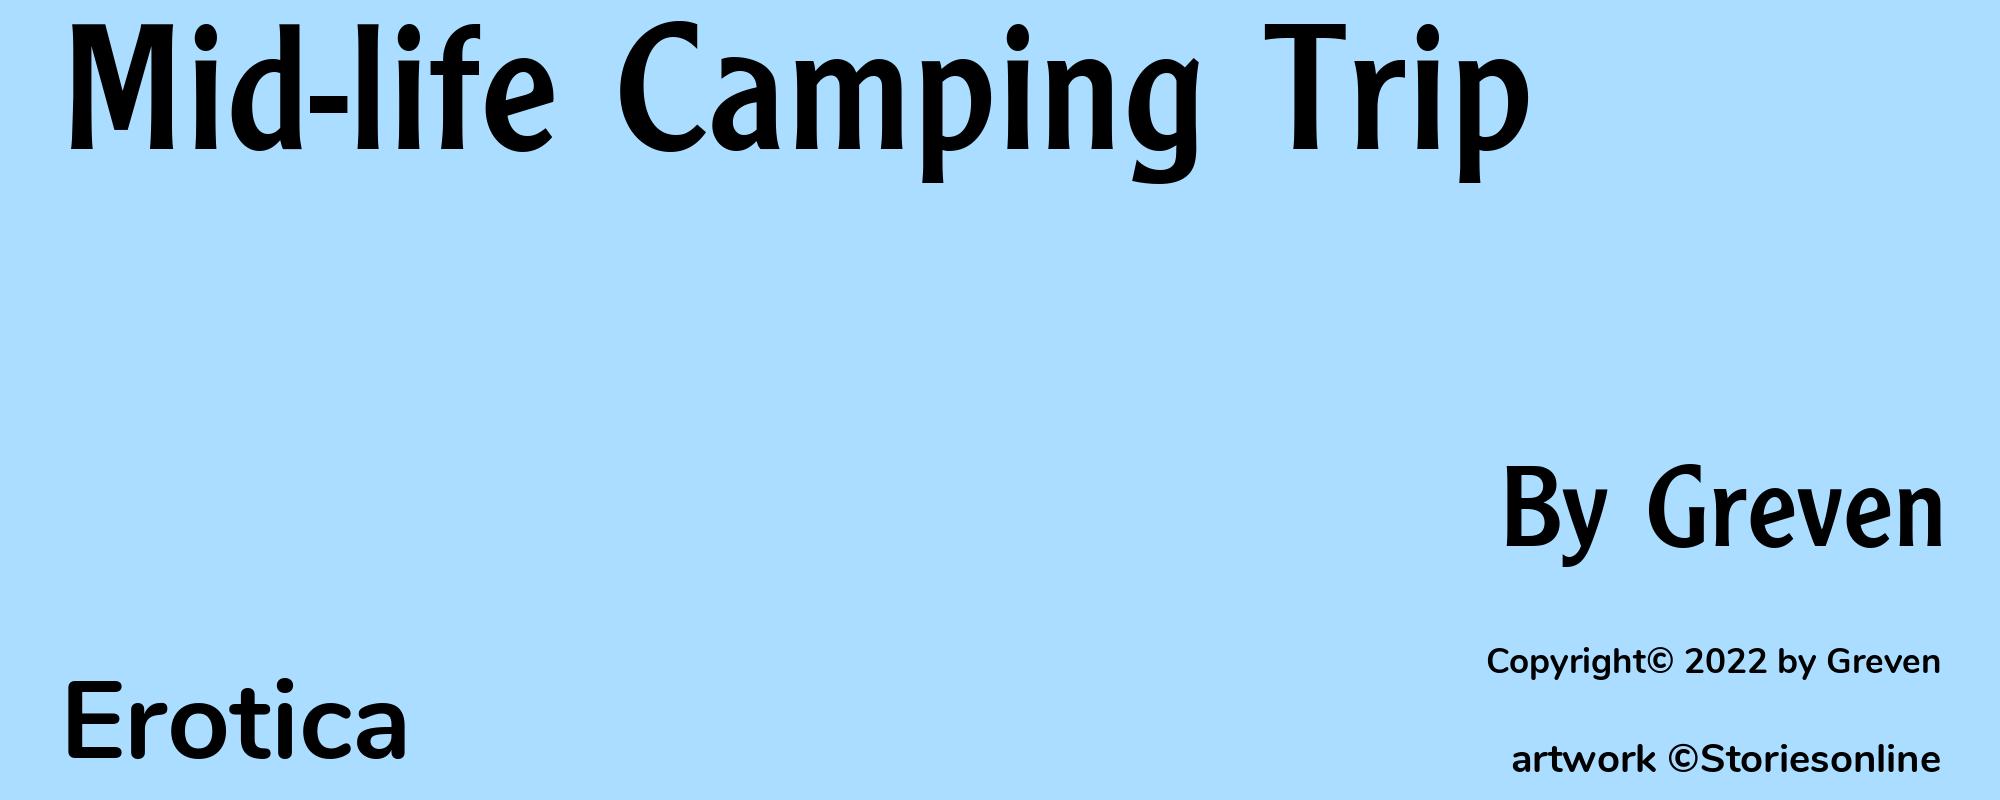 Mid-life Camping Trip - Cover